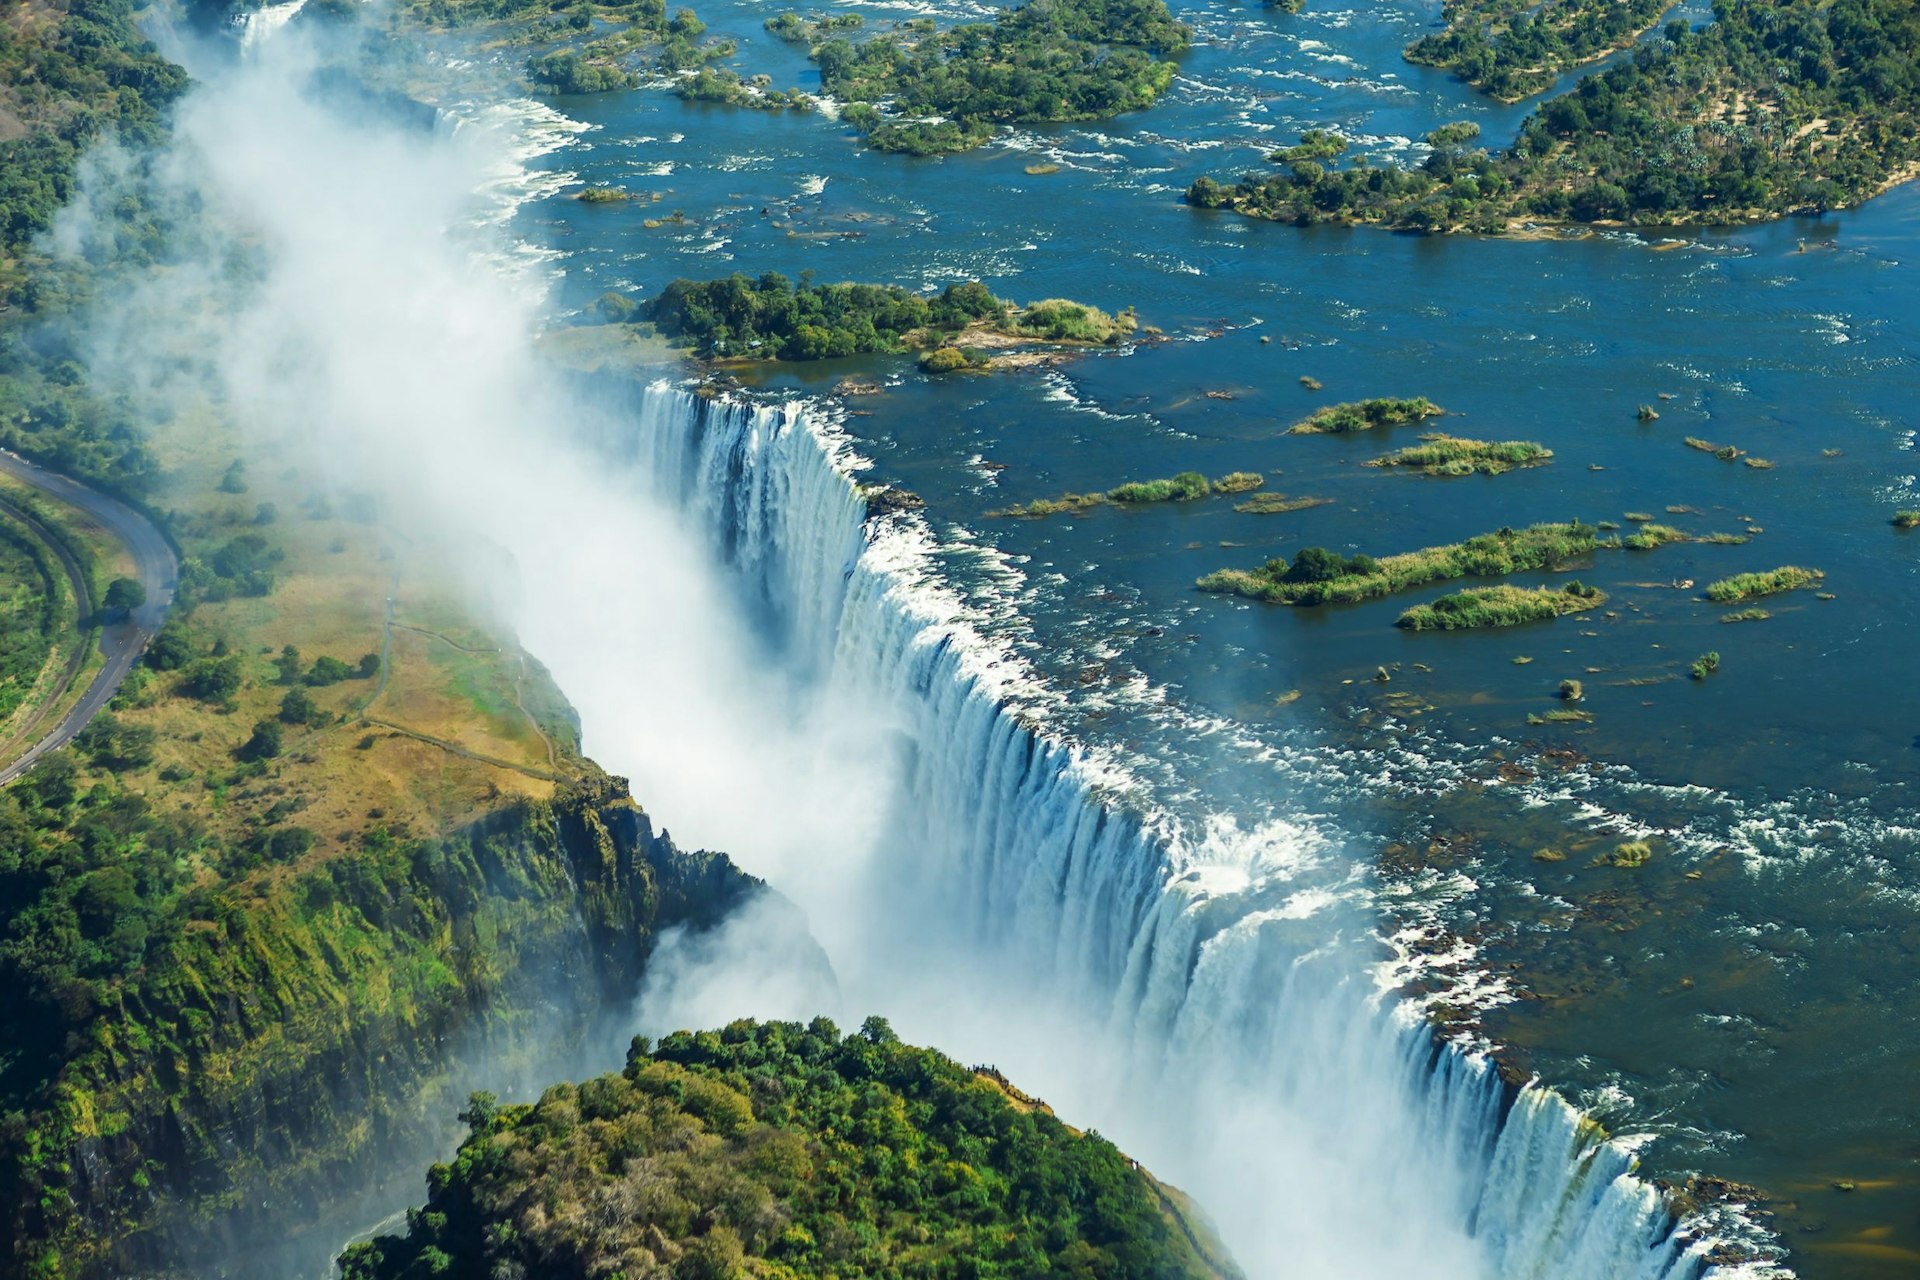 A curtain of water plunges over the mile-wide precipice that is Victoria Falls; misty clouds rise into the skies, while the waters of the Zambezi are channeled through the narrow gorge that makes the border between Zimbabwe and Zambia.